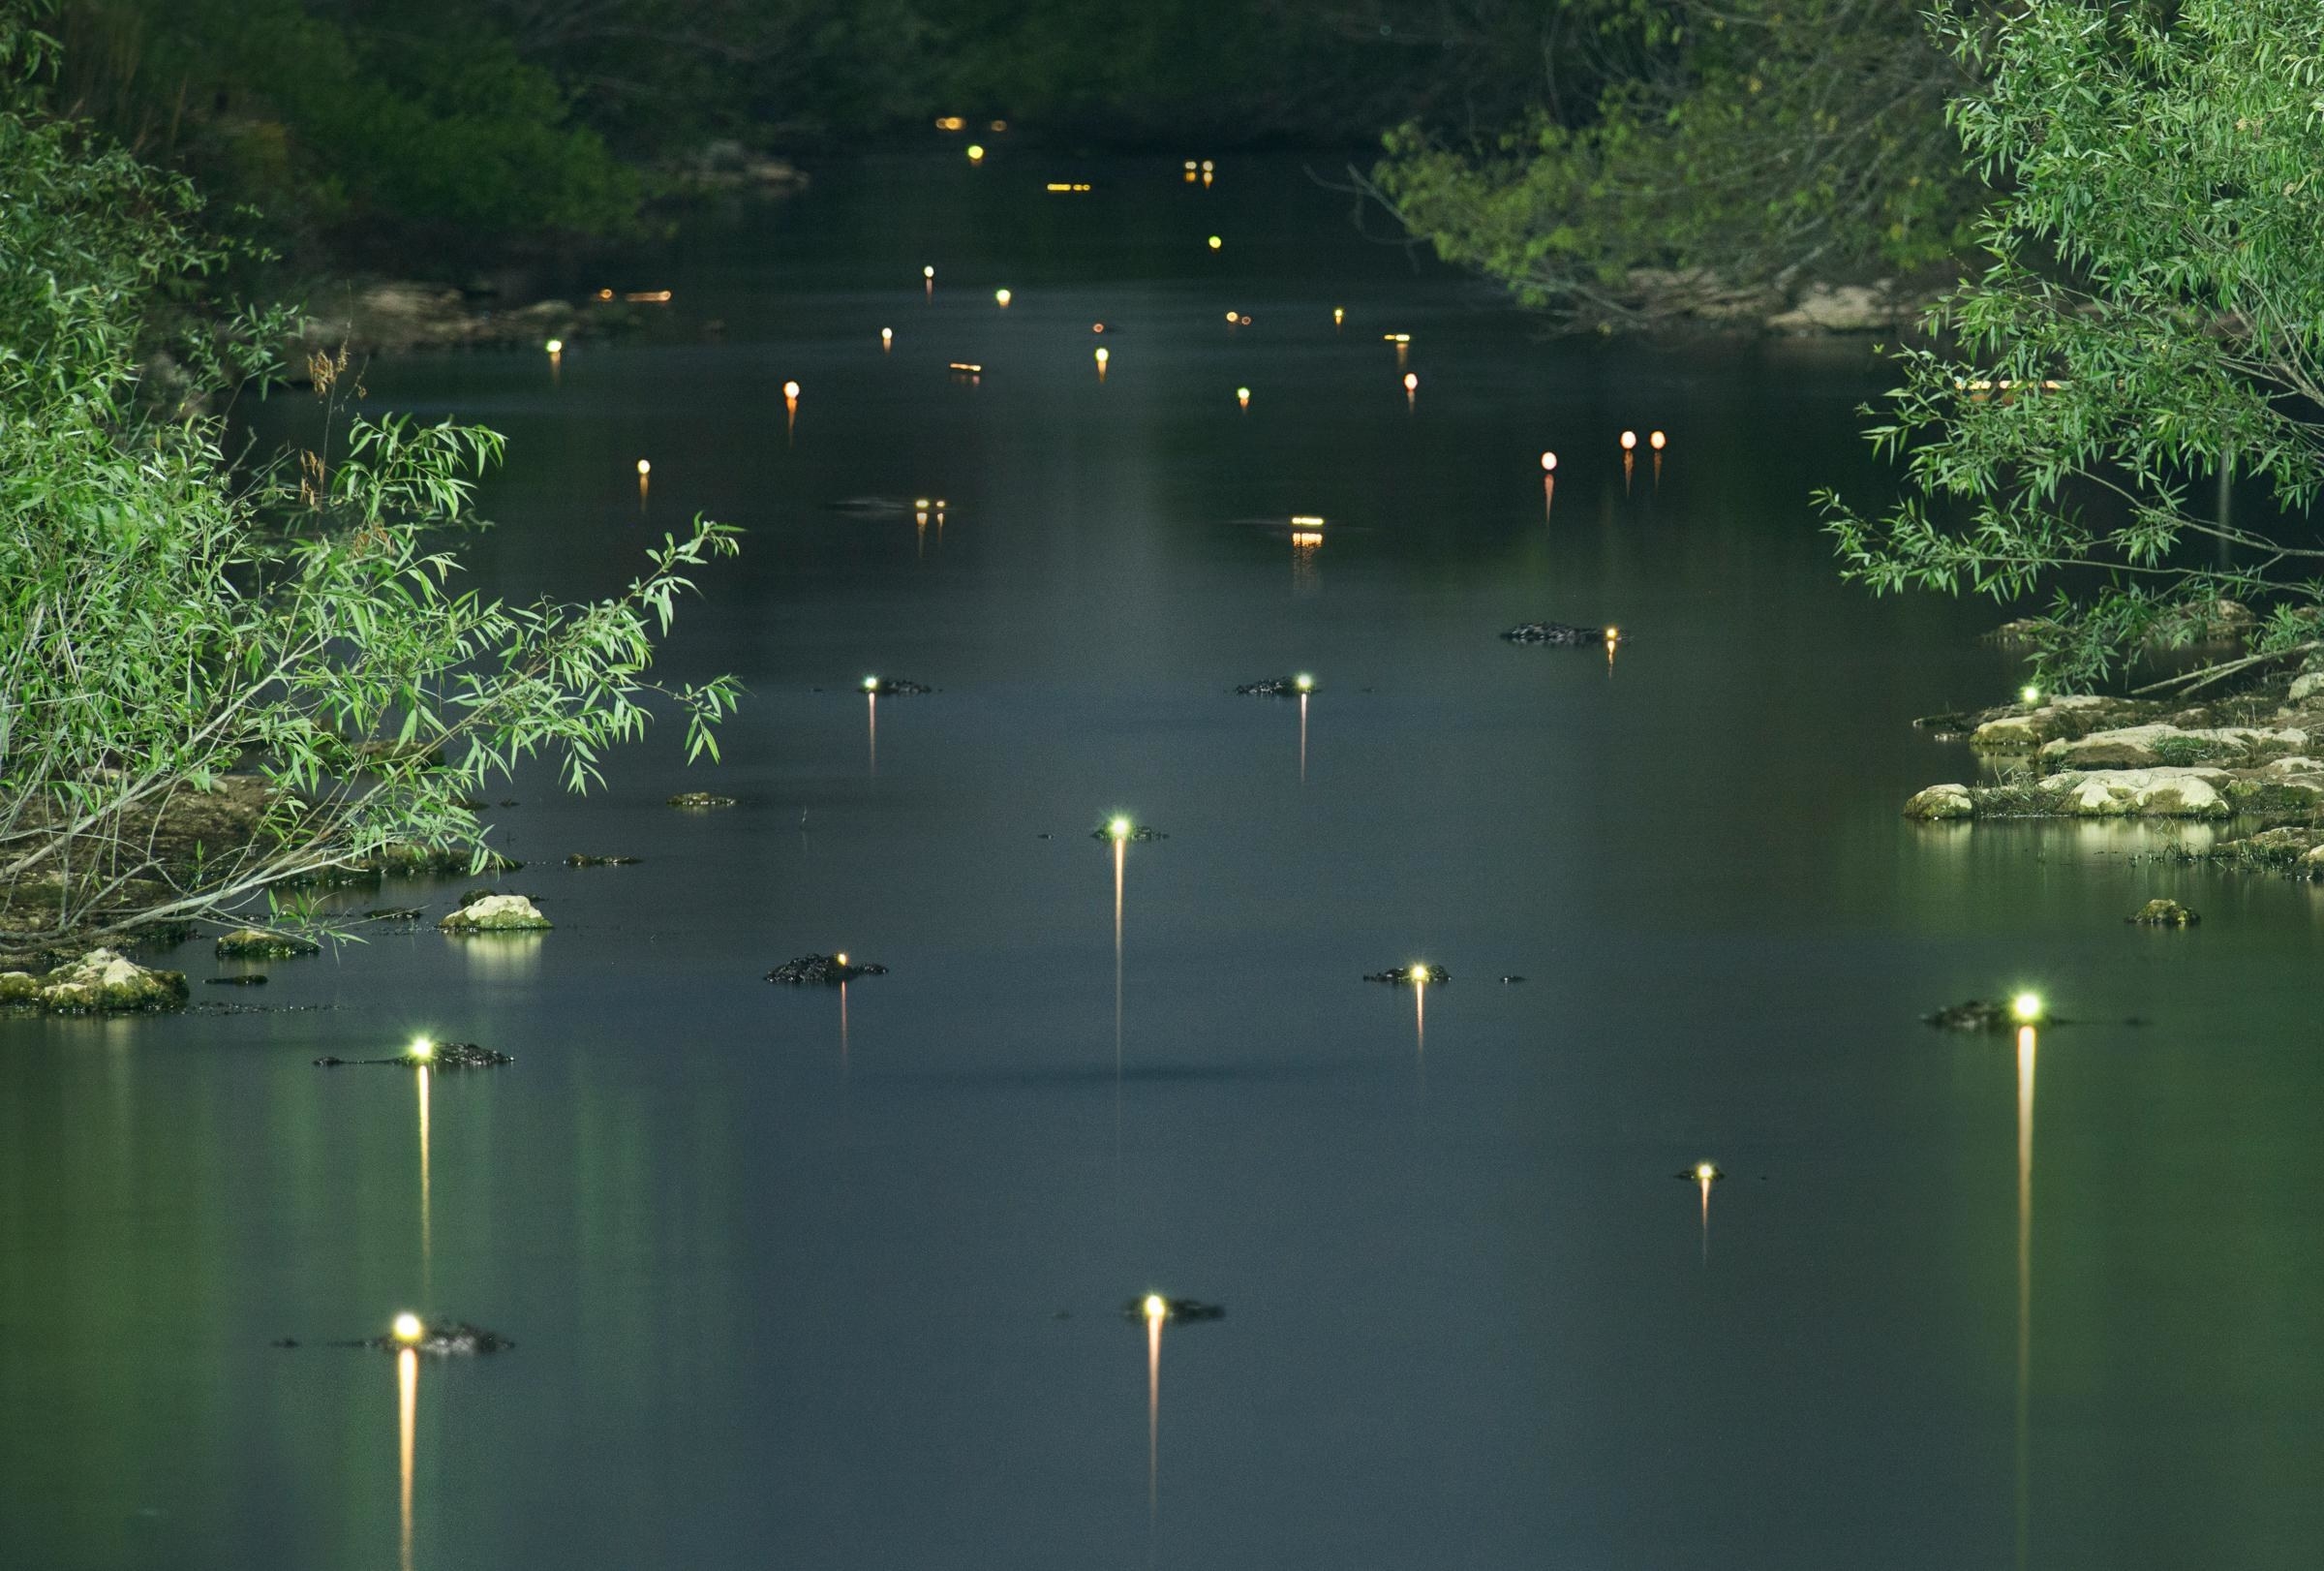 A river full of alligators whose eyes are reflecting from the camera flash